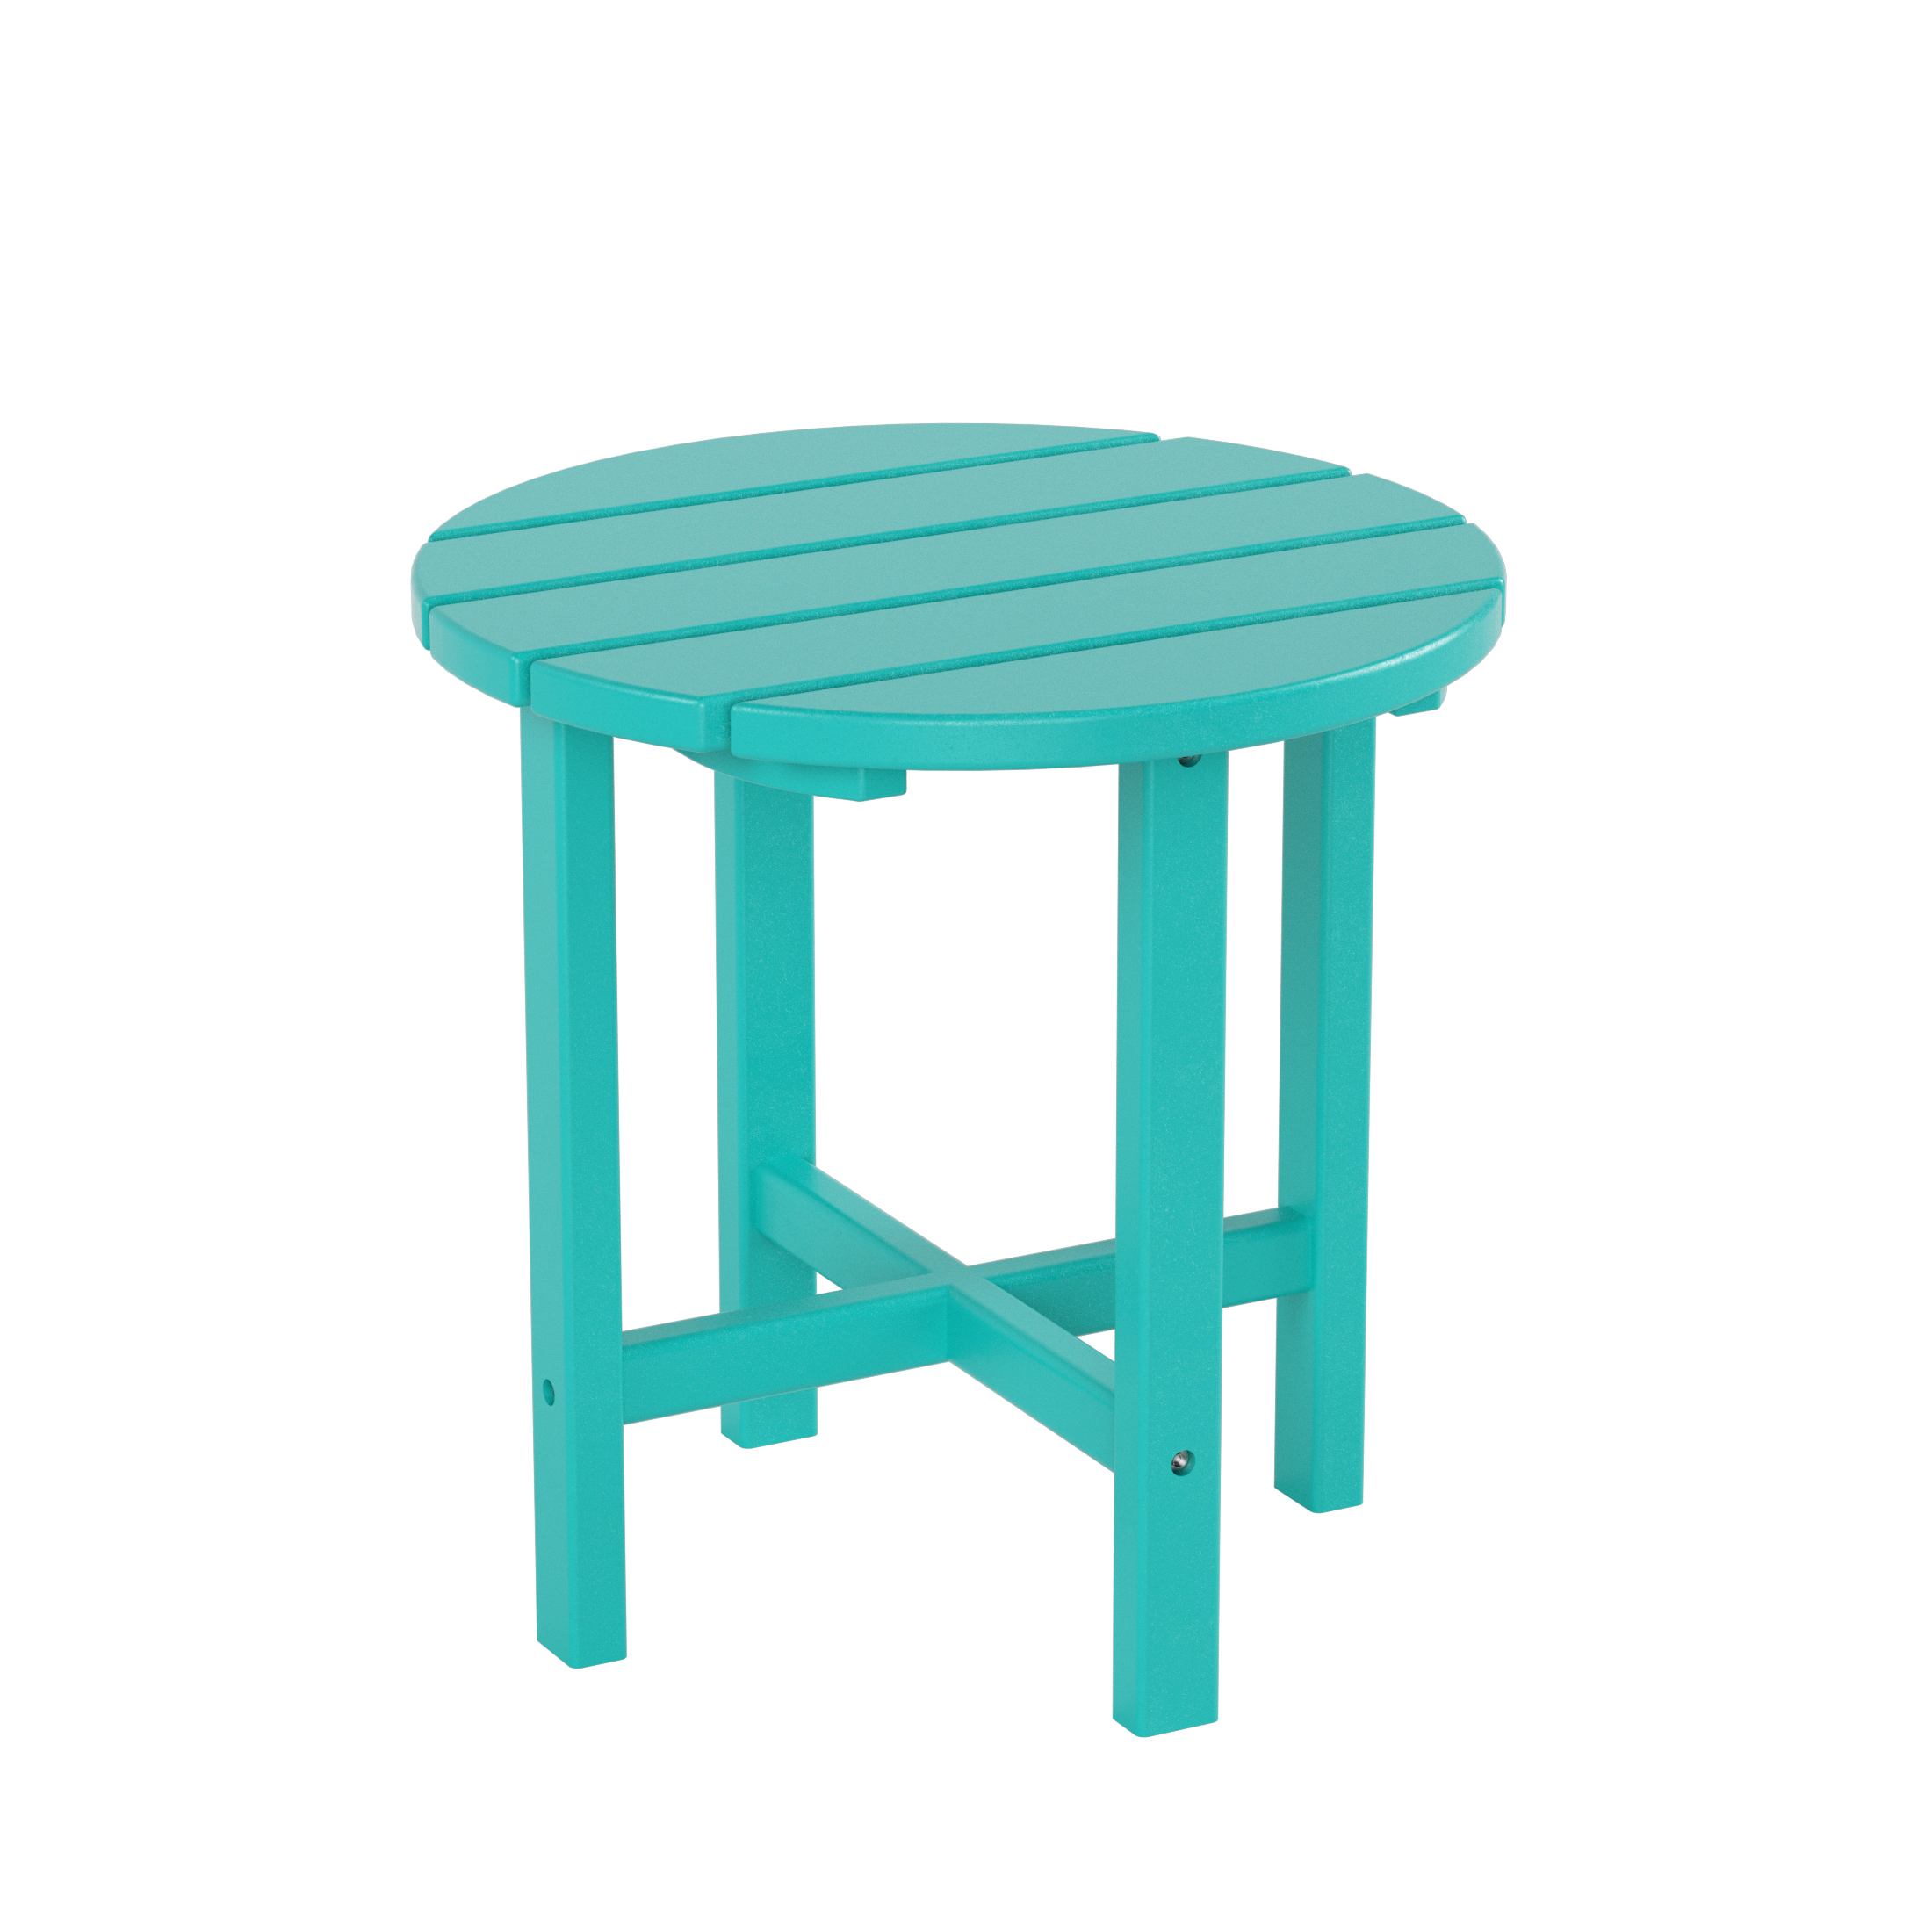 GARDEN 2-Piece Set Classic Plastic Porch Rocking Chair with Round Side Table Included, Turquoise - image 3 of 7